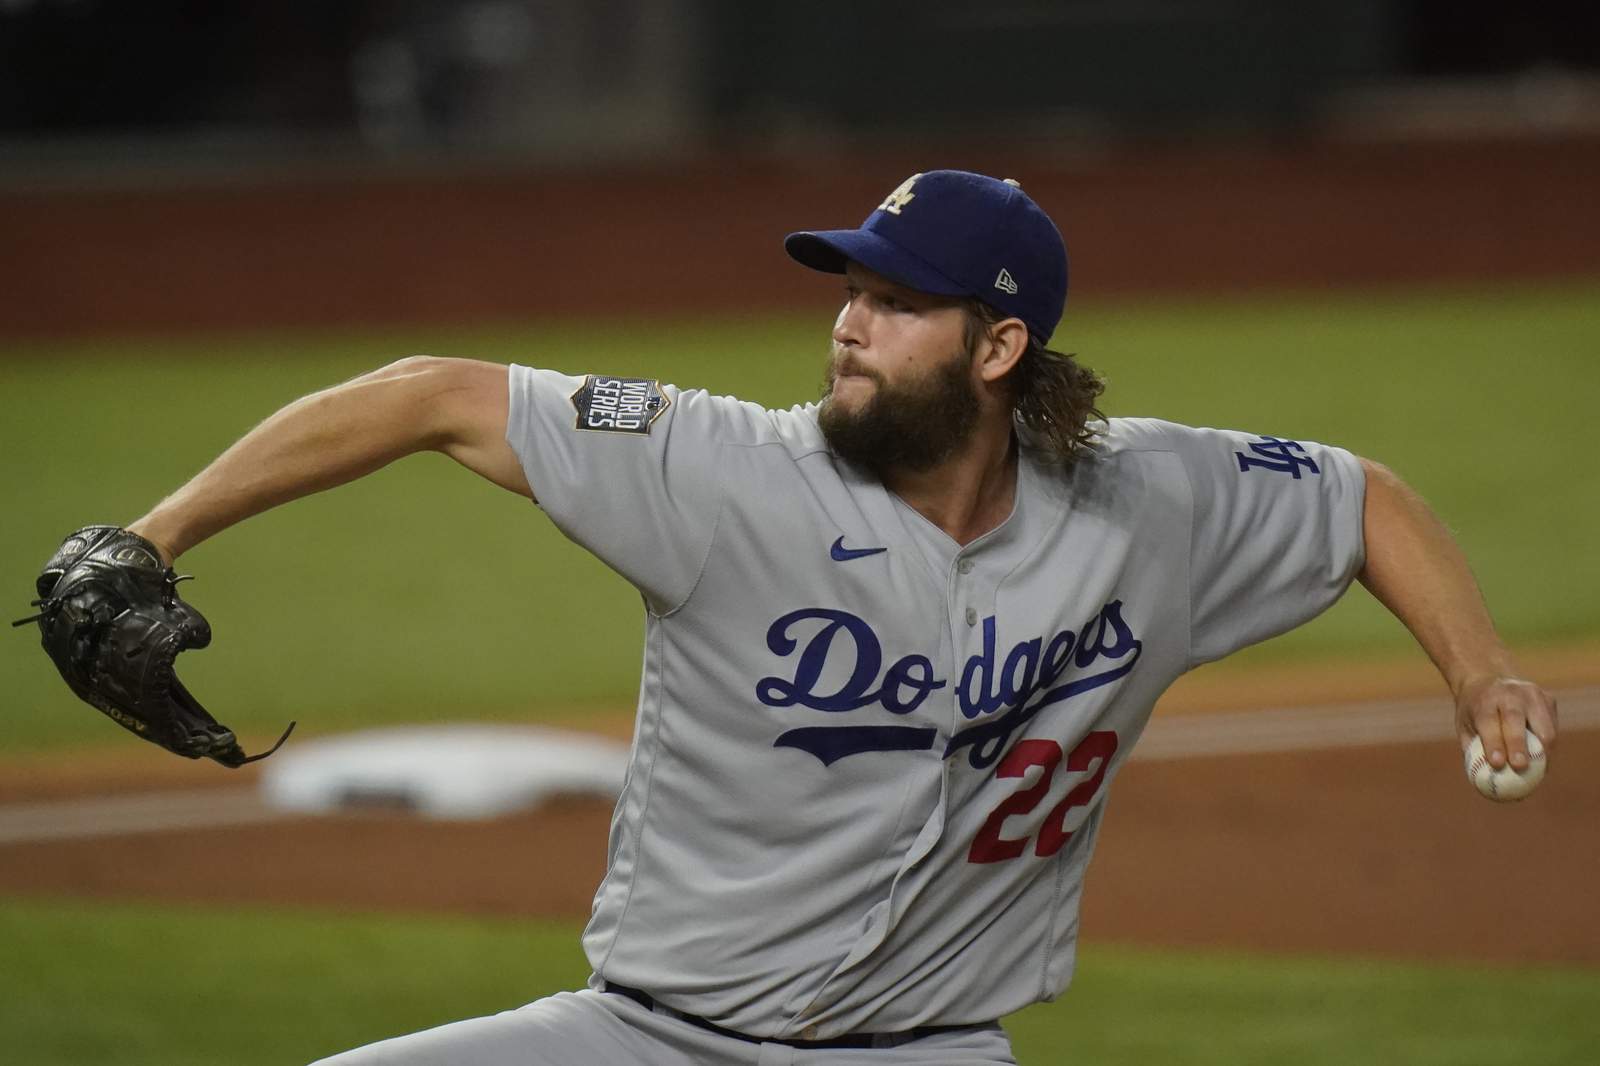 The Latest: Kershaw beats Rays again, gives LA Series lead